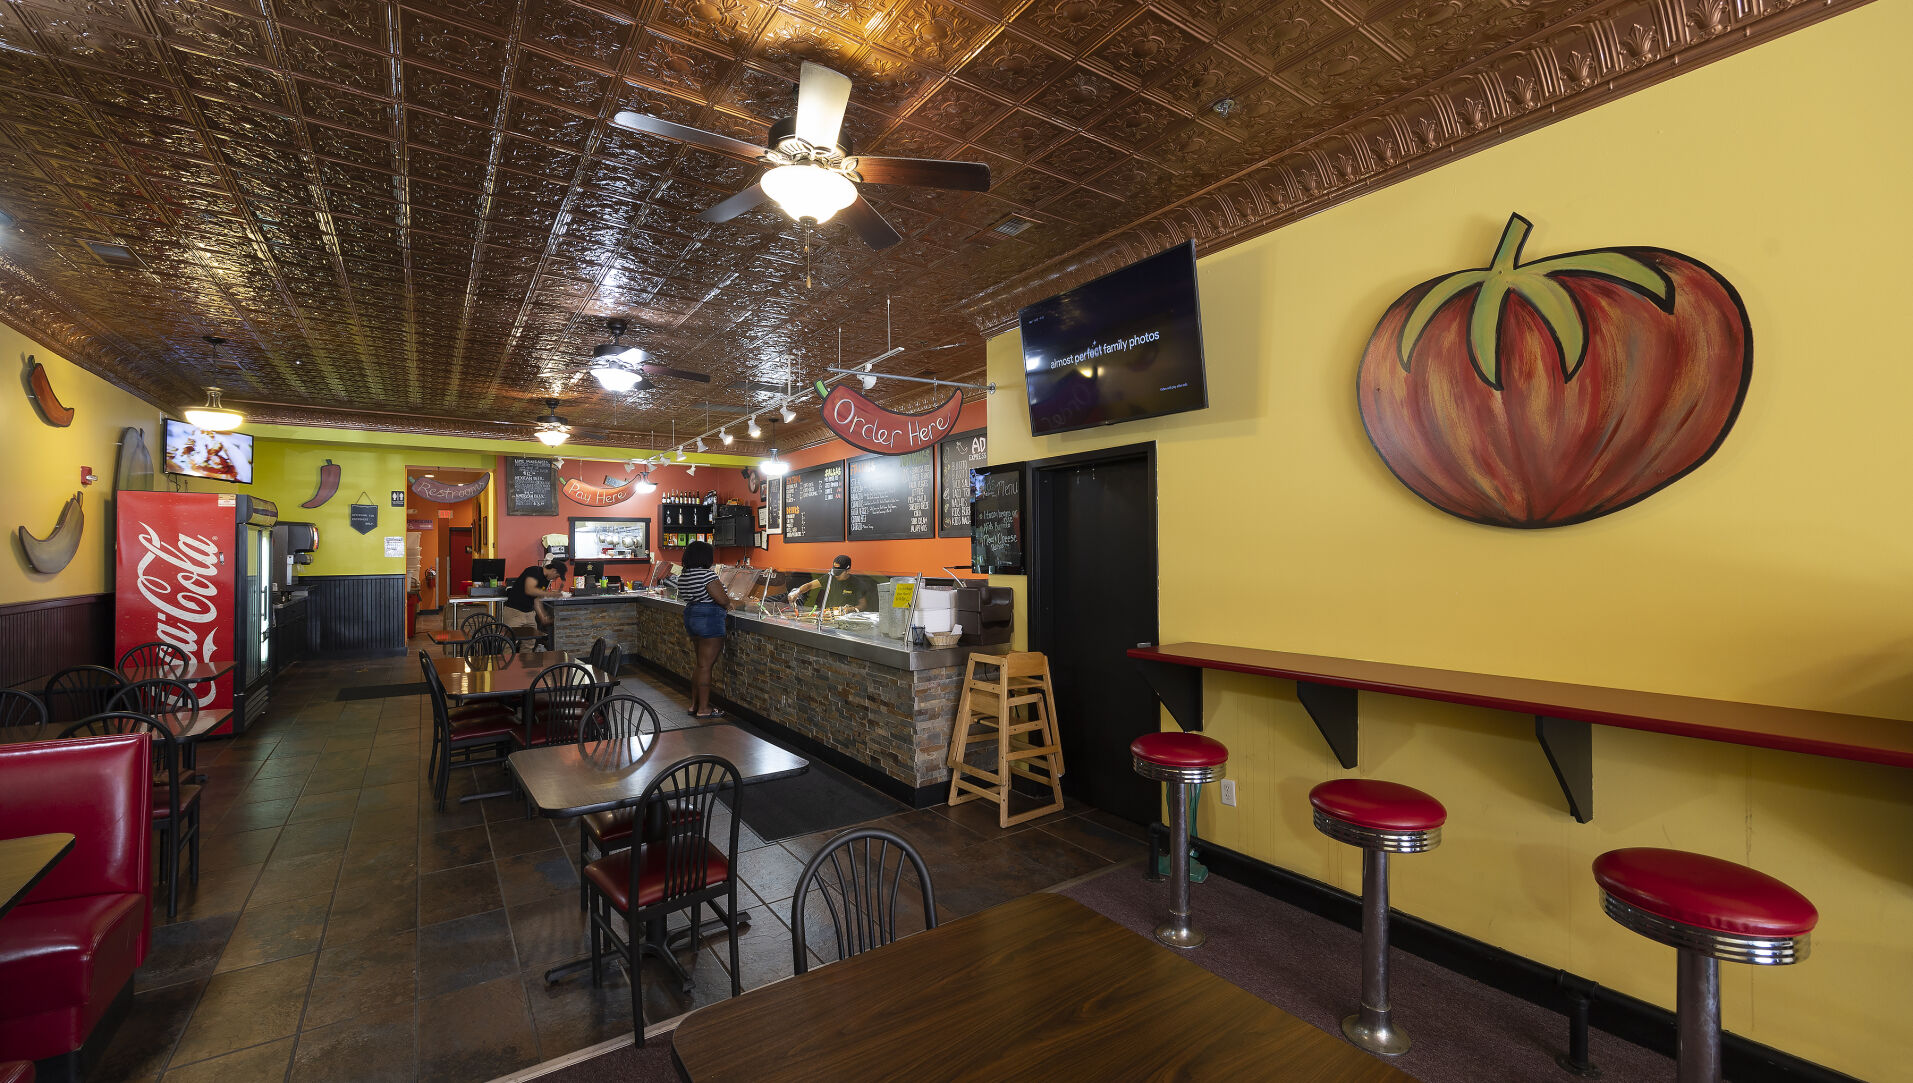 Interior at Adobos Mexican Grill in Dubuque.    PHOTO CREDIT: Stephen Gassman